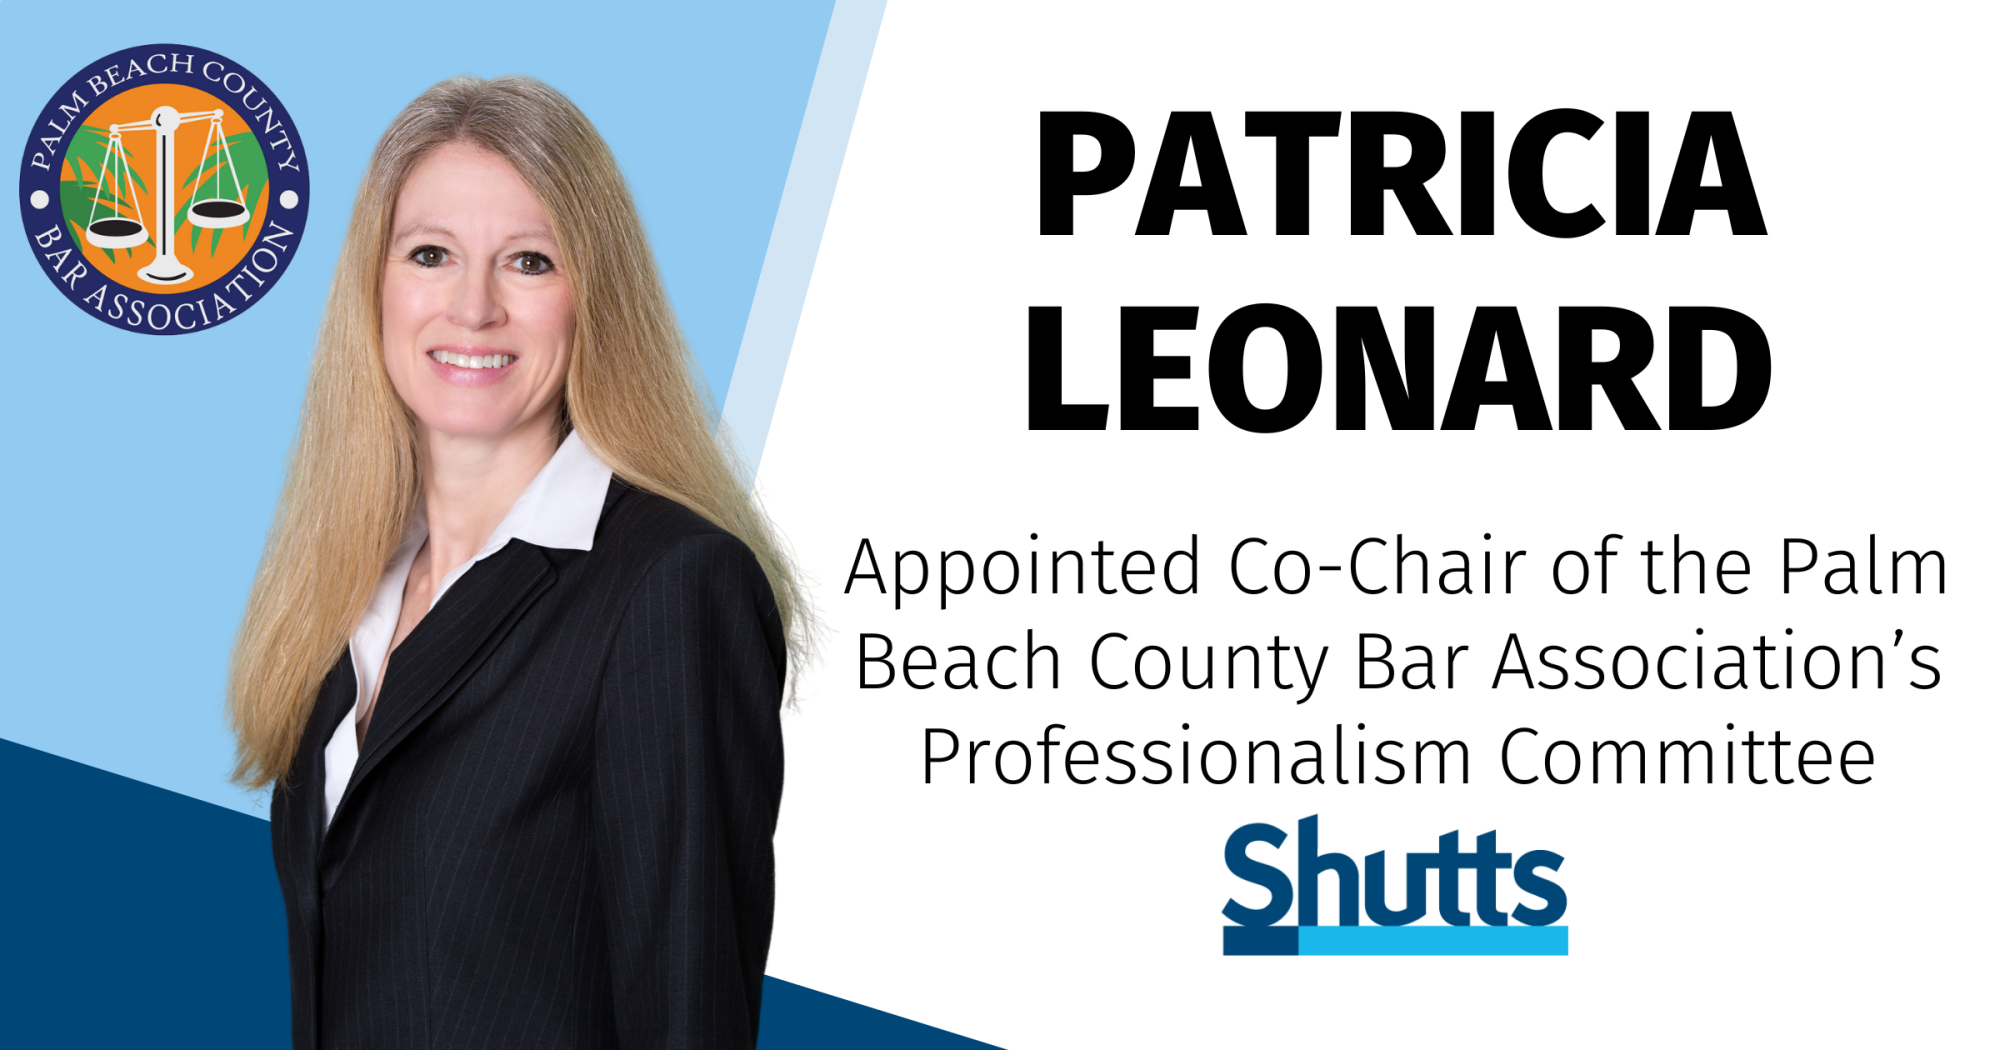 Patricia Leonard Appointed Co-Chair of the Palm Beach County Bar Association’s Professionalism Committee